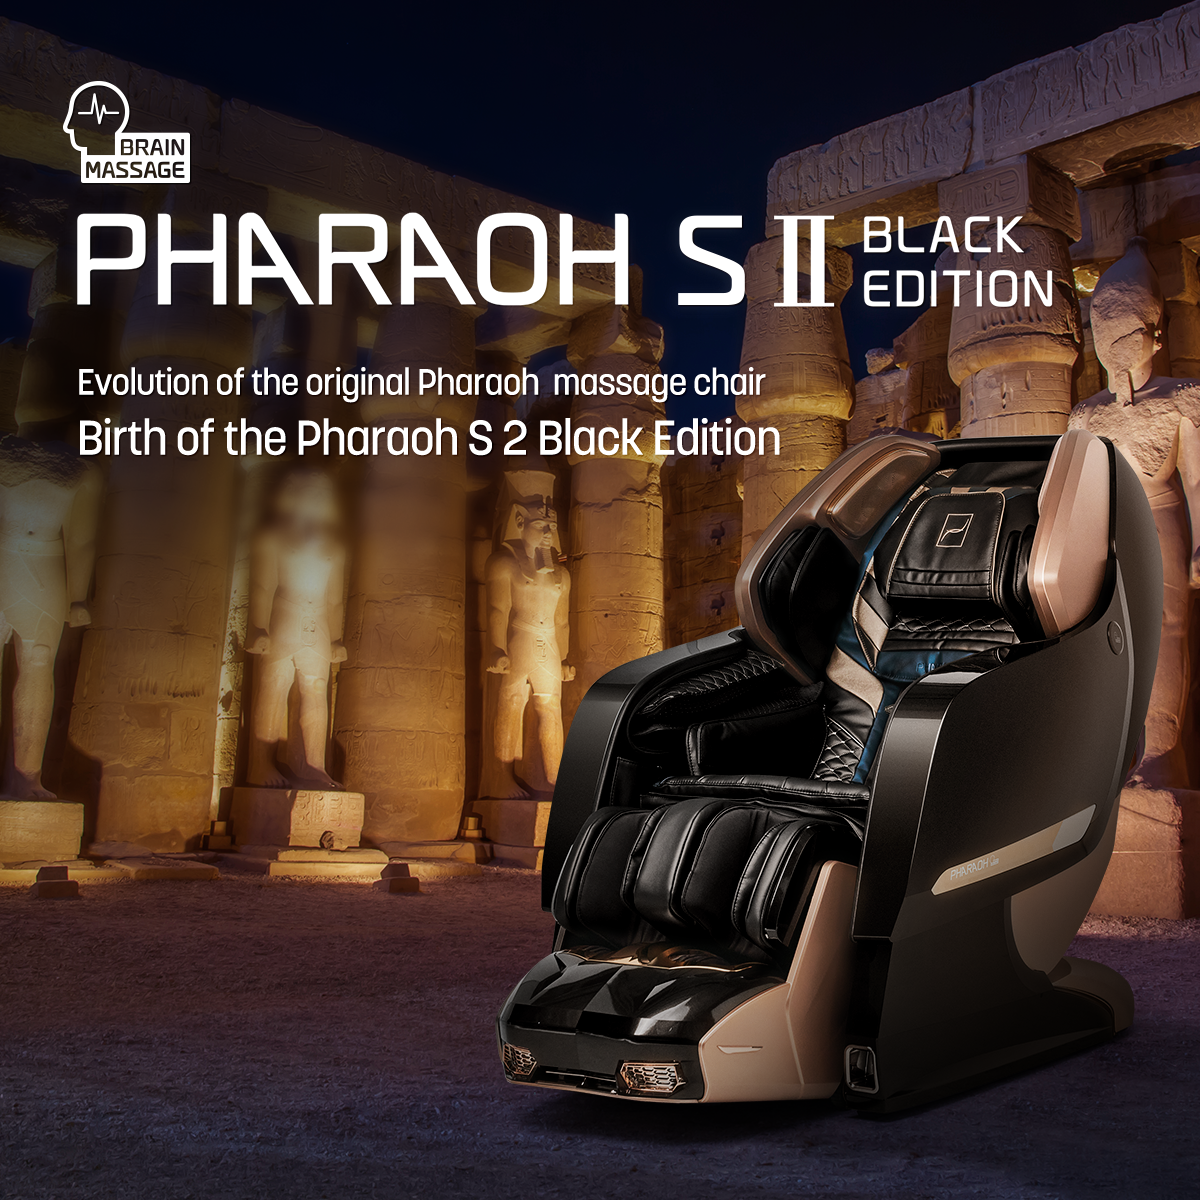 Evolution of the original Pharaoh  massage chair and Birth of the Pharaoh S 2 Black Edition